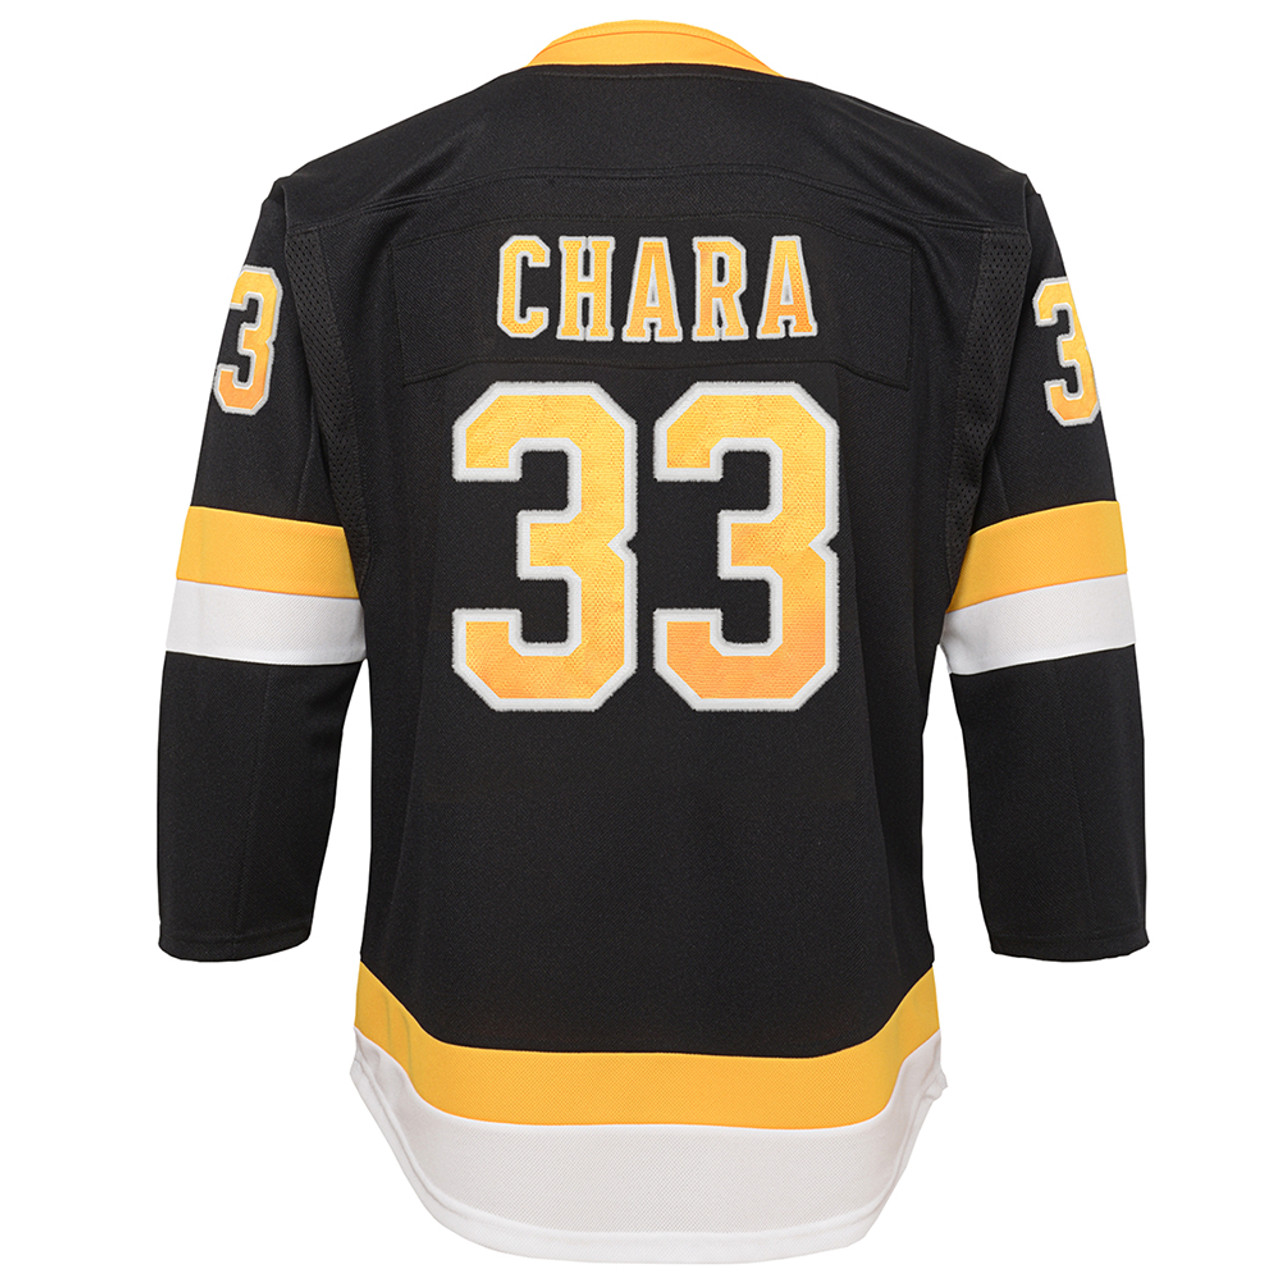 Chara Youth Premier Third Jersey 